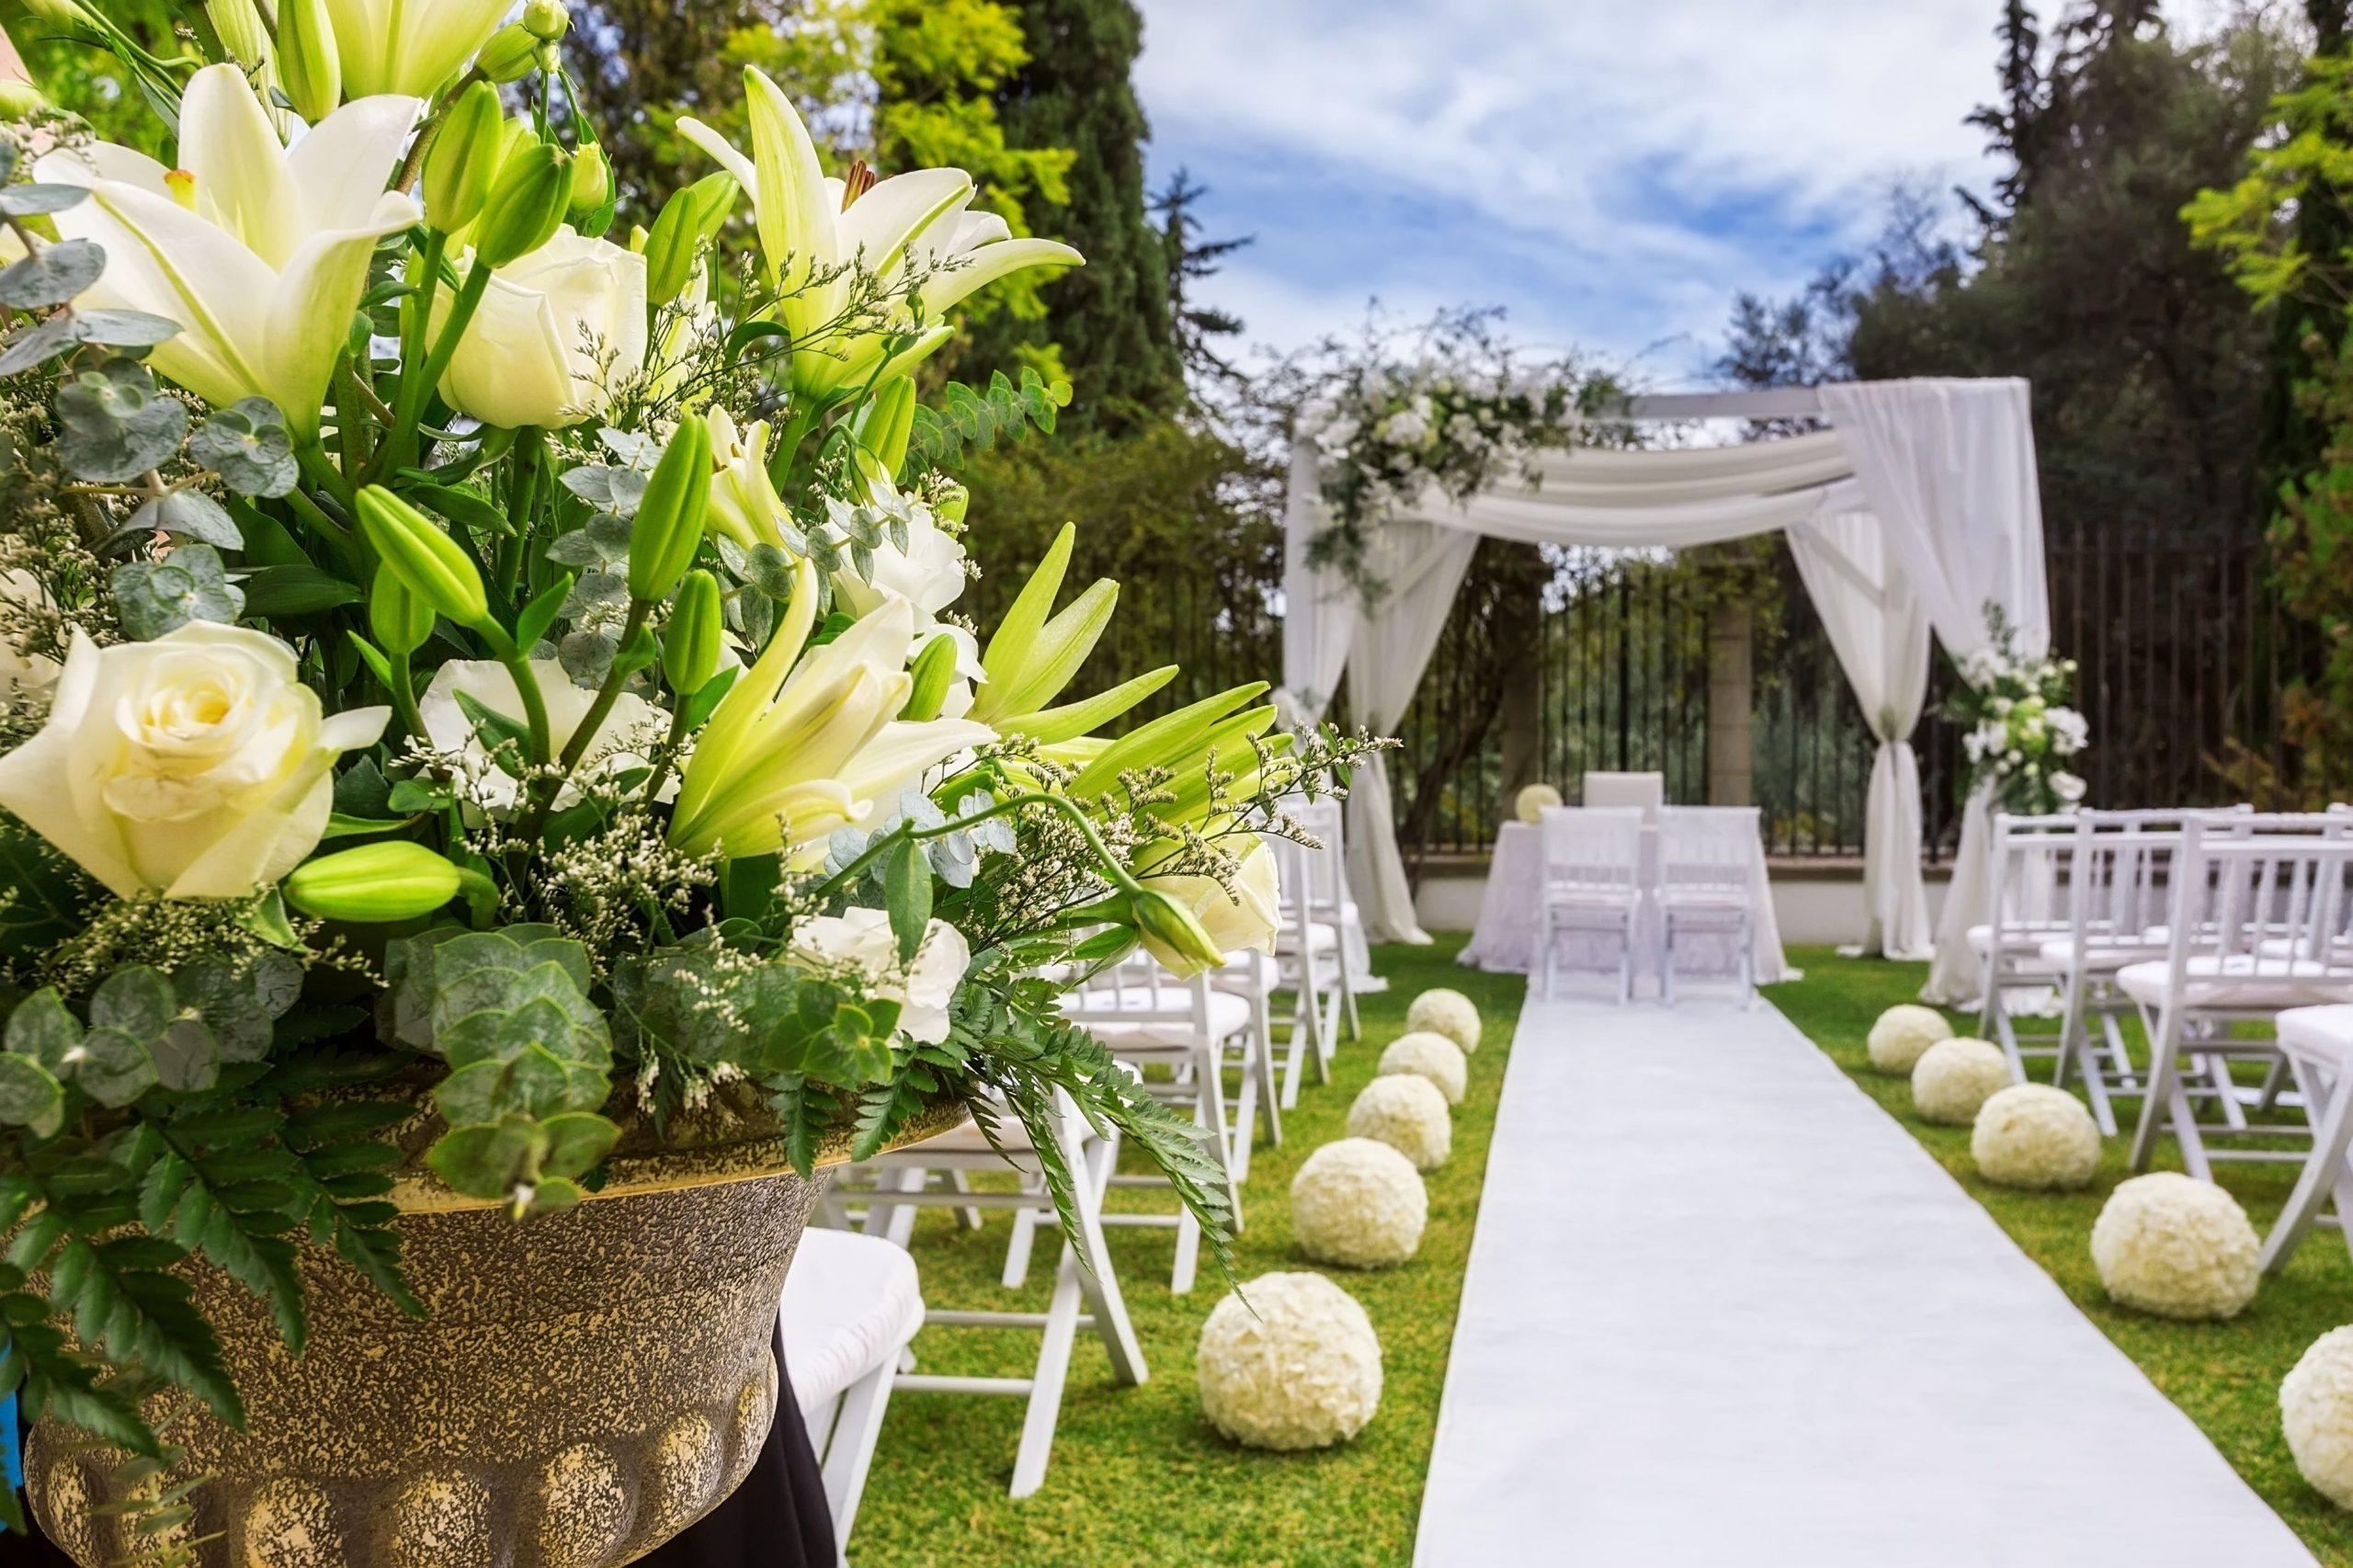 A wedding site decorated with flowers and some chairs